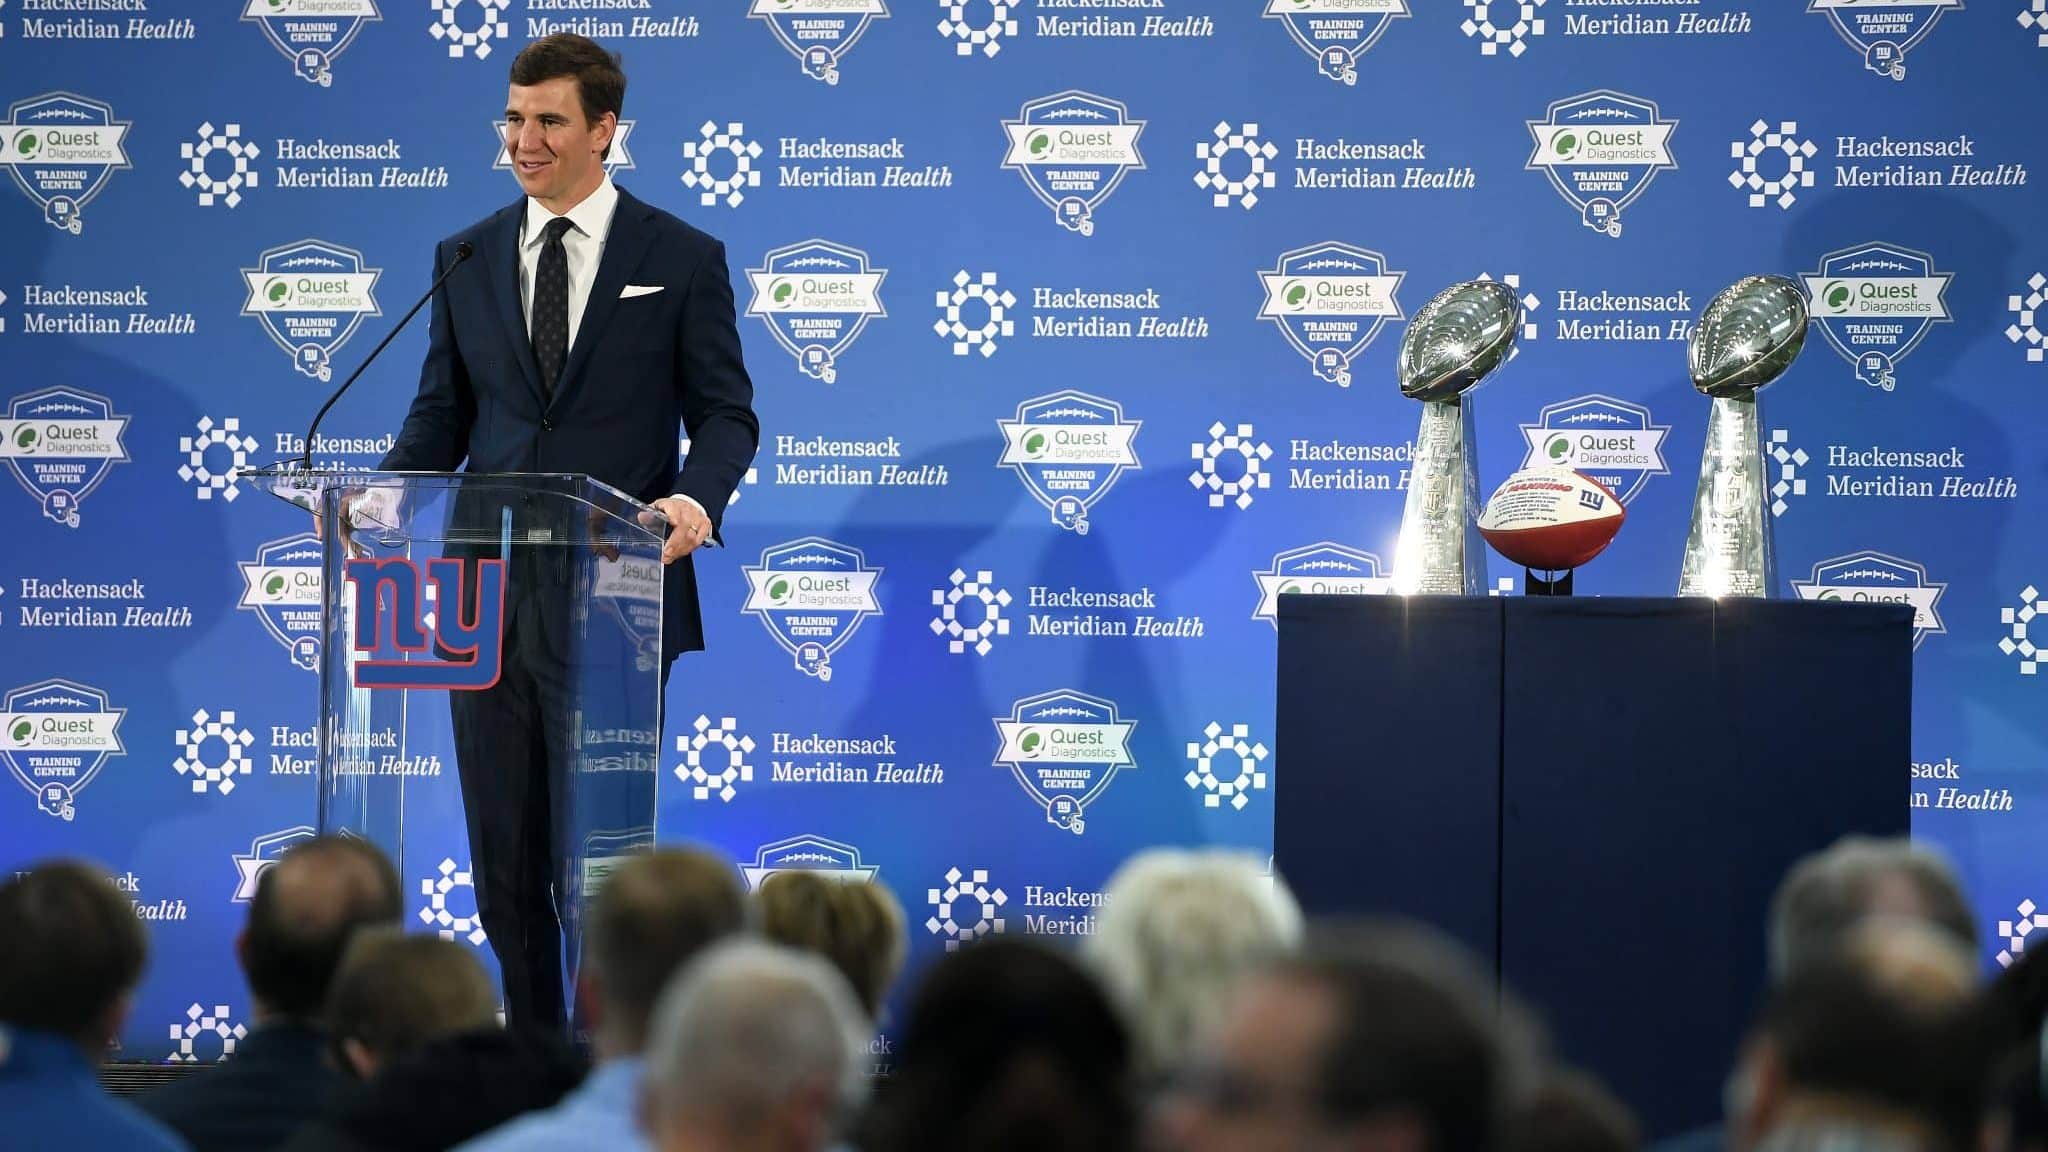 EAST RUTHERFORD, NEW JERSEY - JANUARY 24: Eli Manning of the New York Giants announces his retirement during a press conference on January 24, 2020 at Quest Diagnostics Training Center in East Rutherford, New Jersey. The two-time Super Bowl MVP is retiring after 16 seasons with the team.